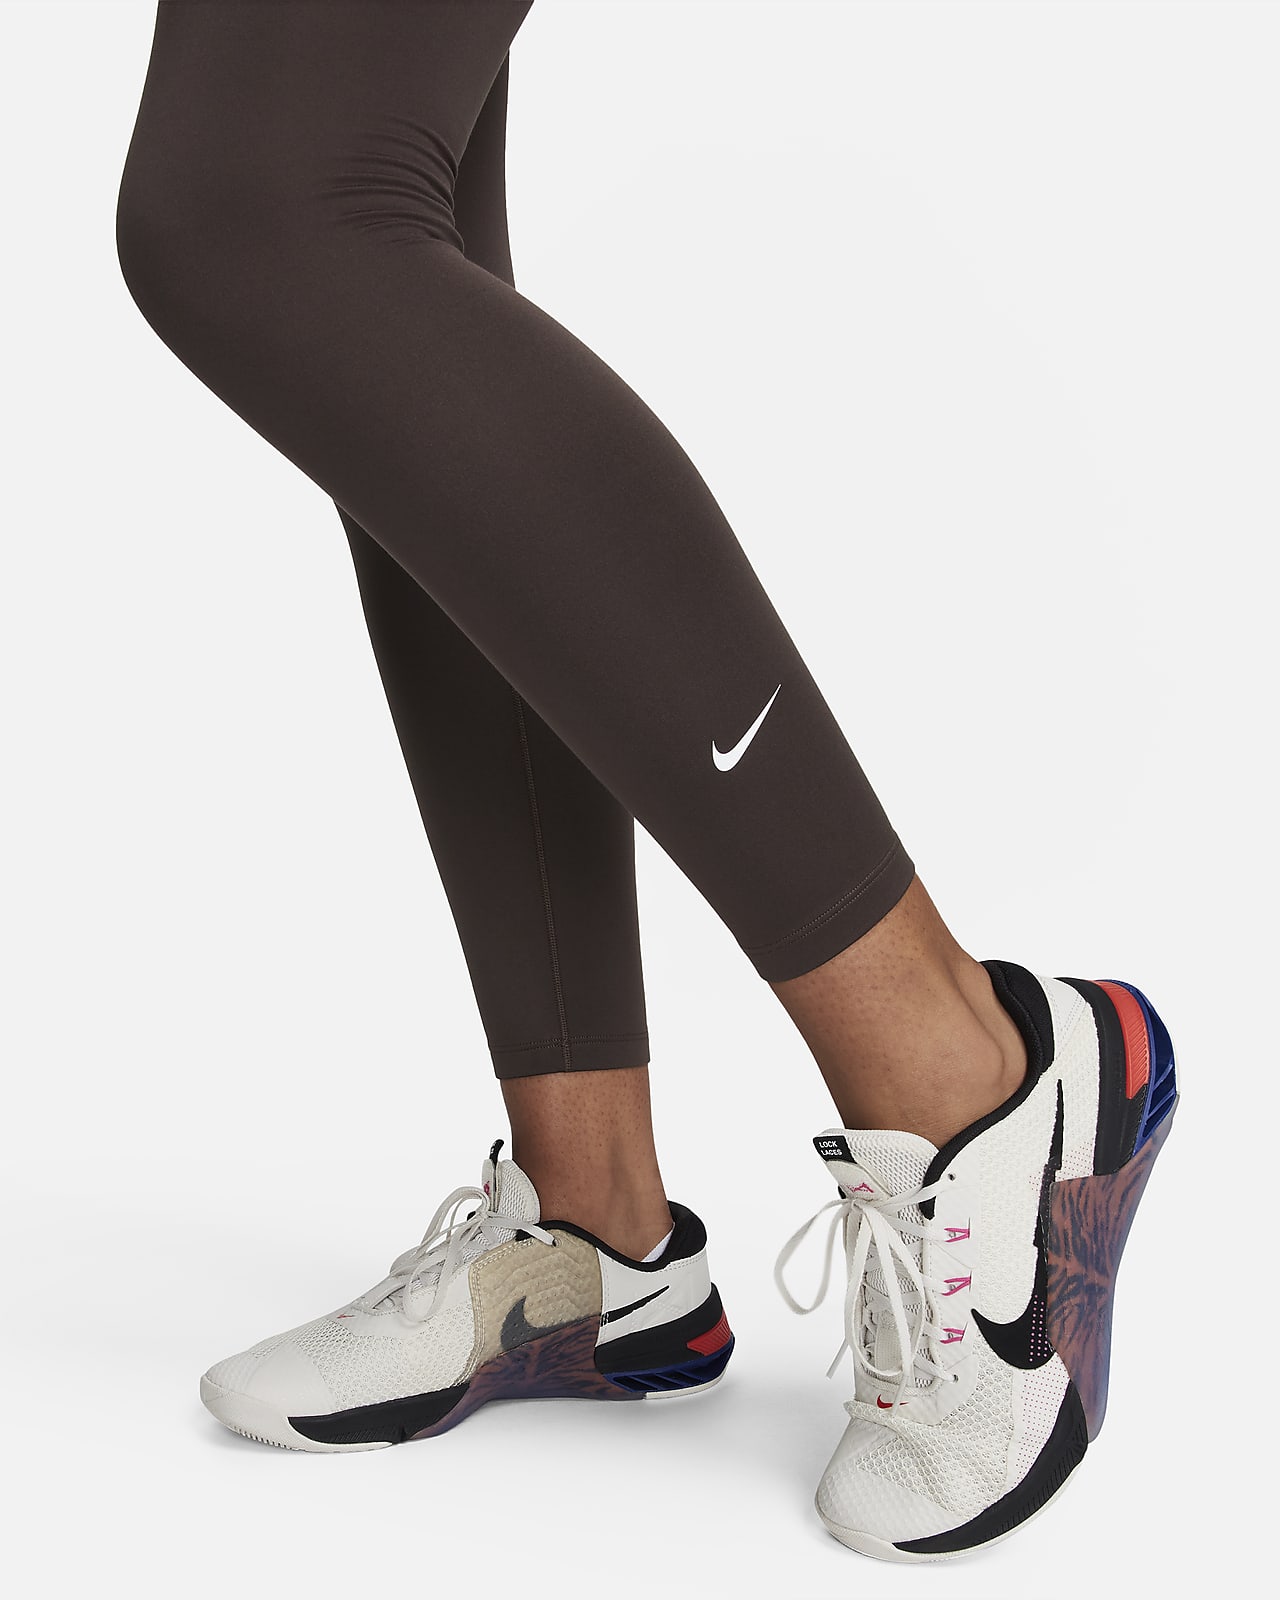 Nike Therma-FIT One Women's High-Waisted 7/8 Leggings (Plus Size). Nike.com